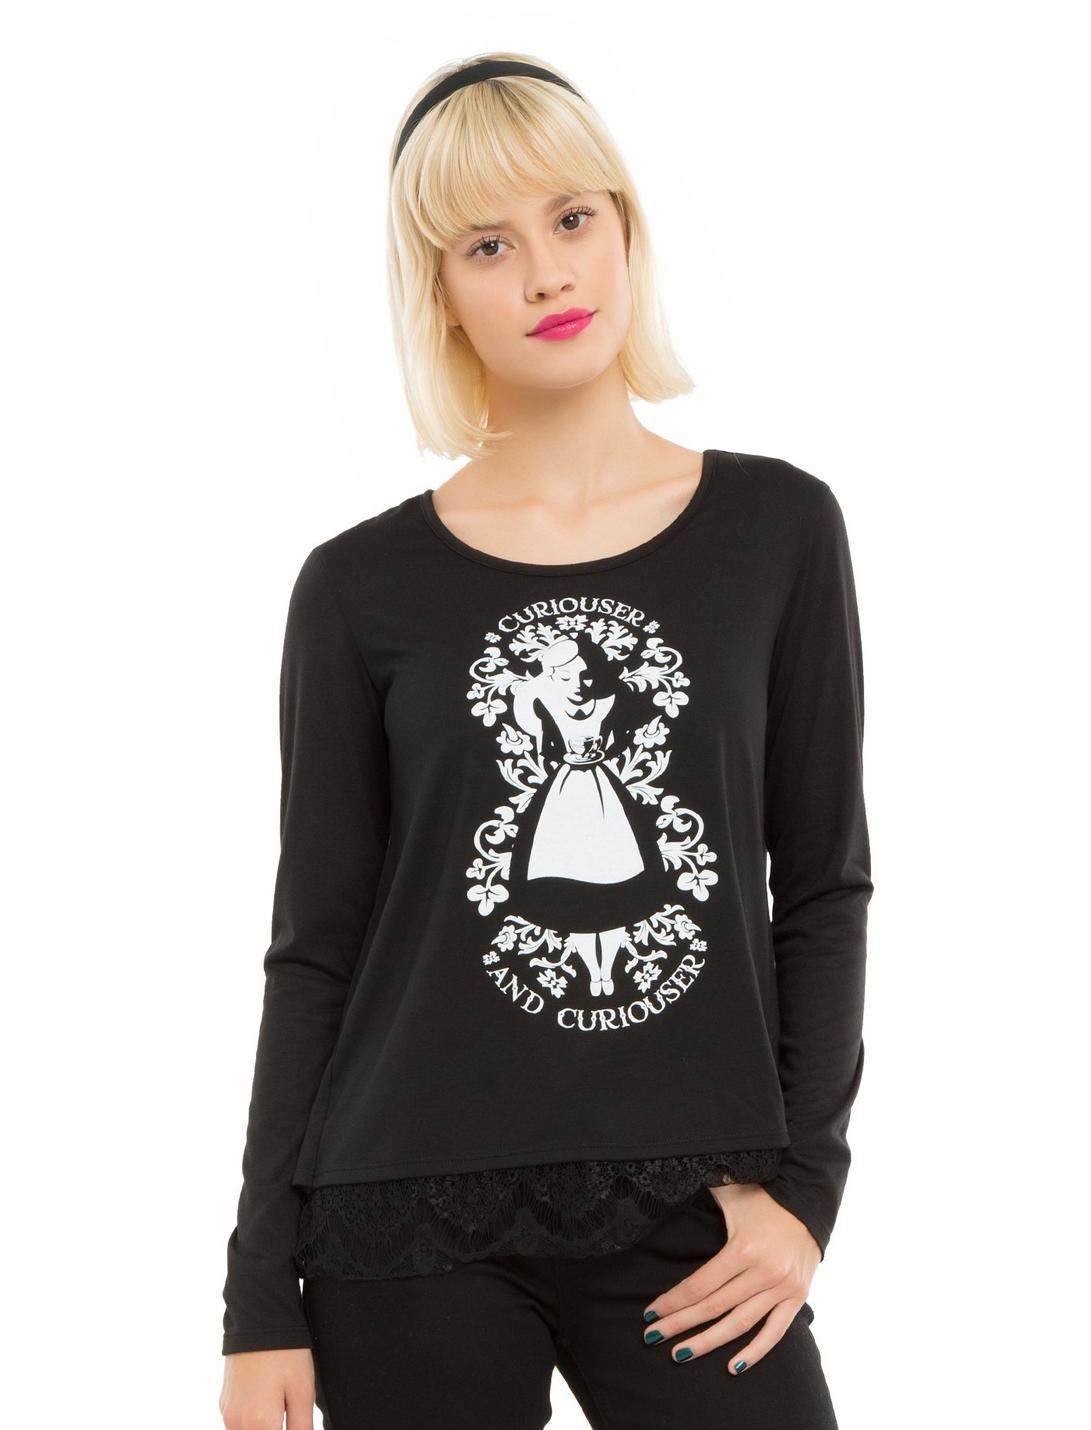 Disney Alice In Wonderland Curiouser And Curiouser Lace Back Girls Top, BLACK, hi-res